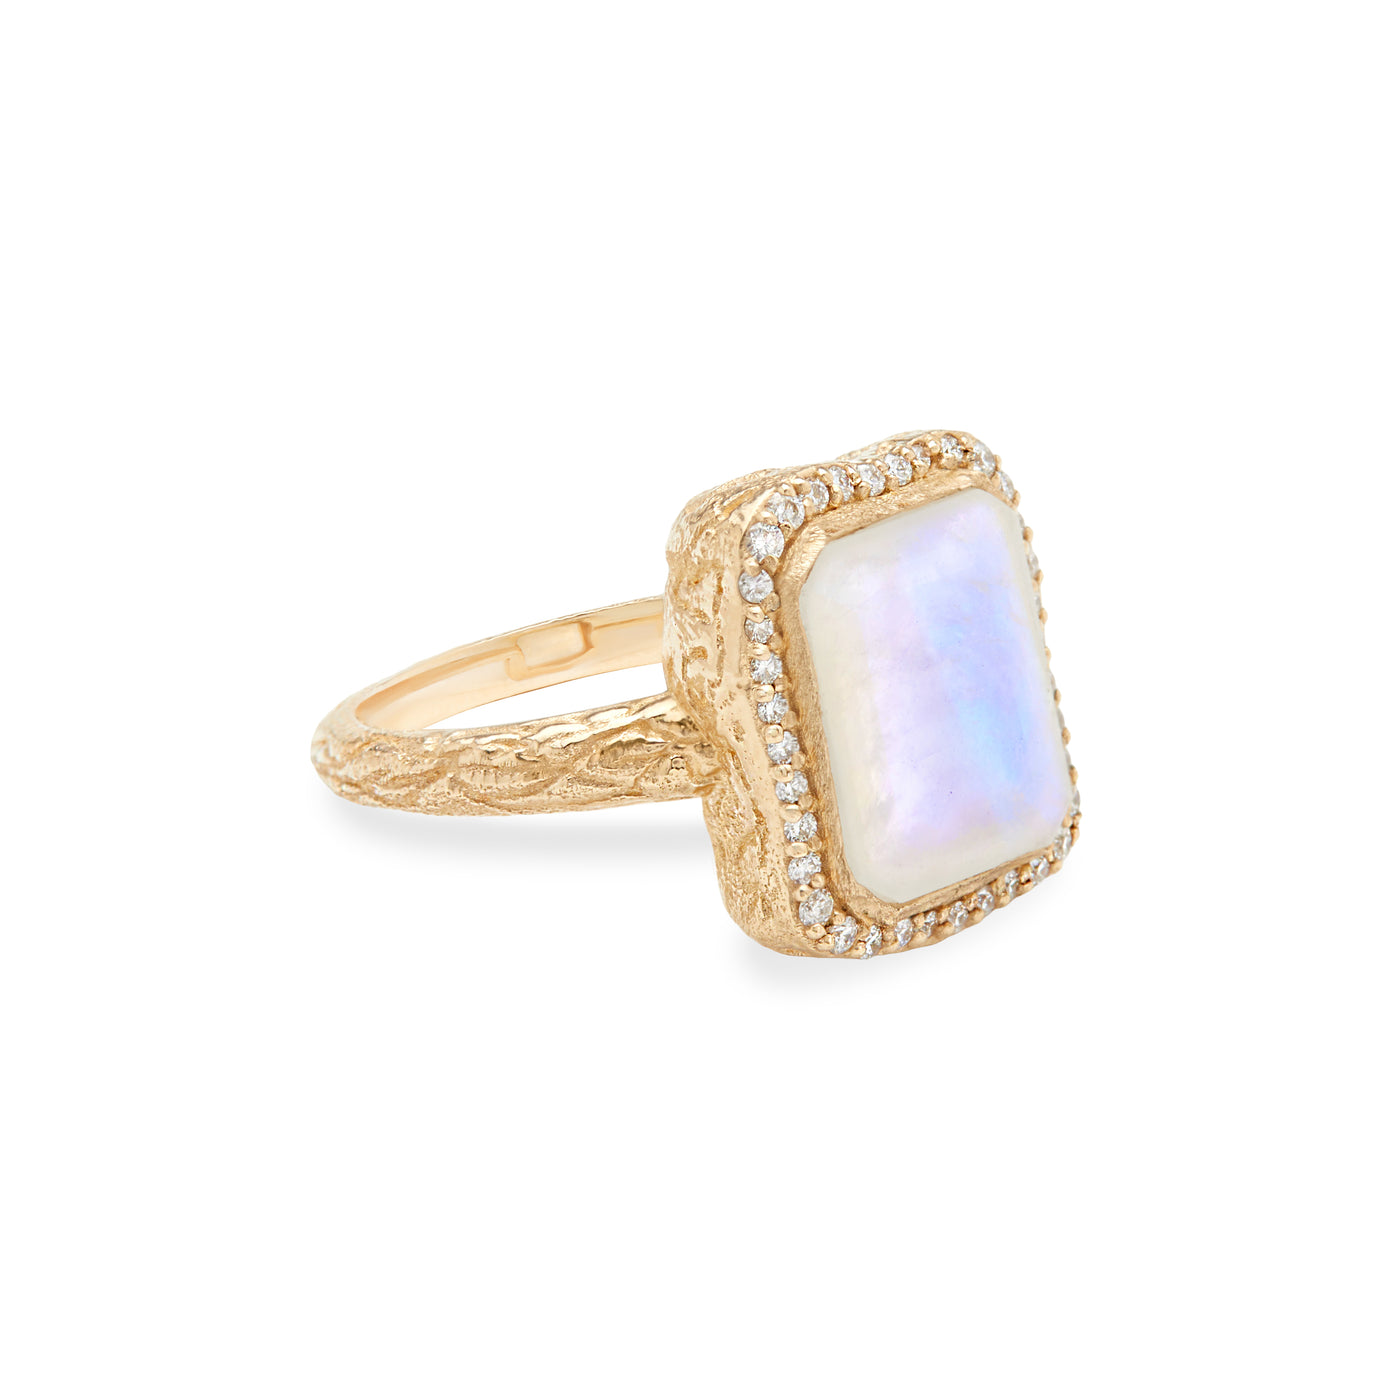 14 Karat Yellow Gold Ring with Rectangle Shaped Moonstone with Halo of White Diamonds Against White Background Turned to Side